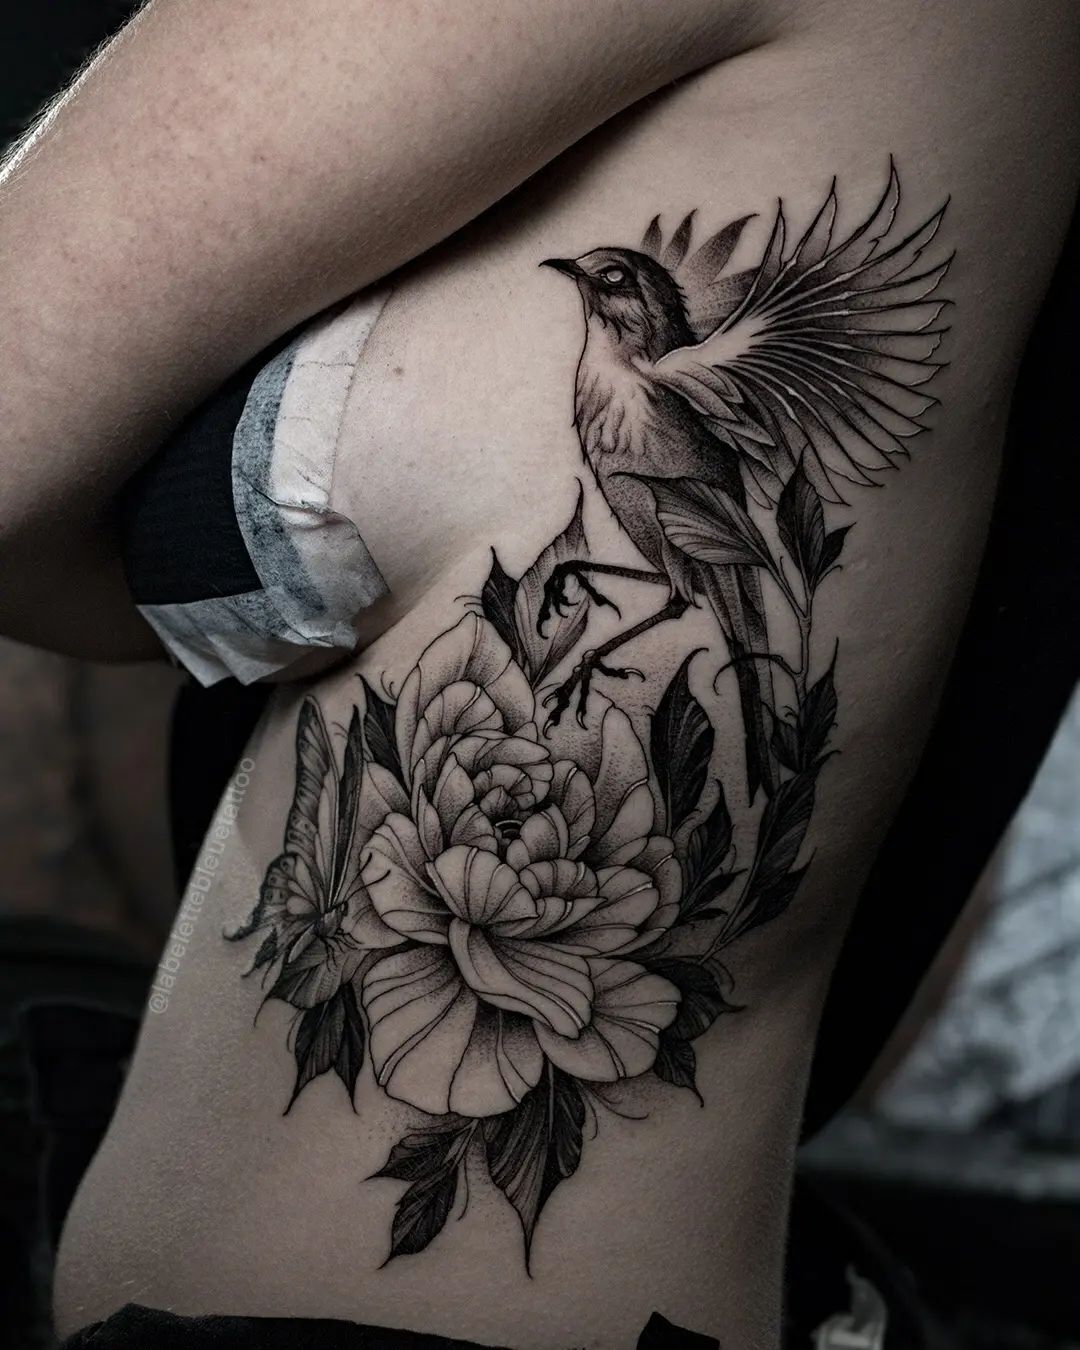 Ever Cute Flying Birds and Flower Tattoos on Shoulder For Women  Bird  shoulder tattoos Bird tattoos for women Shoulder tattoos for women